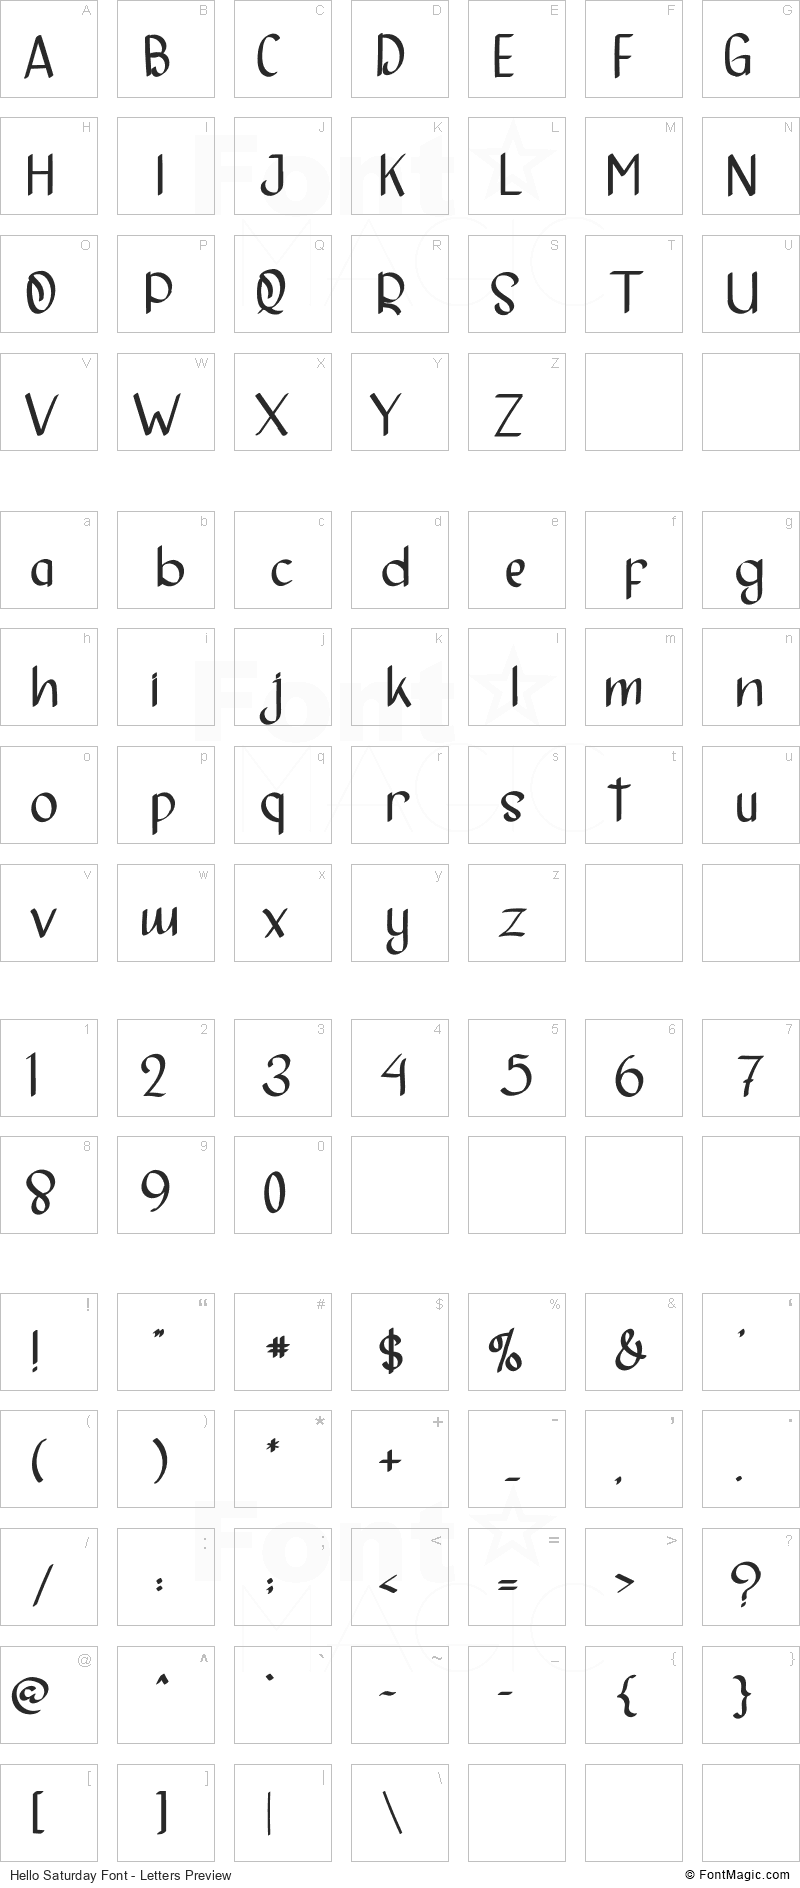 Hello Saturday Font - All Latters Preview Chart